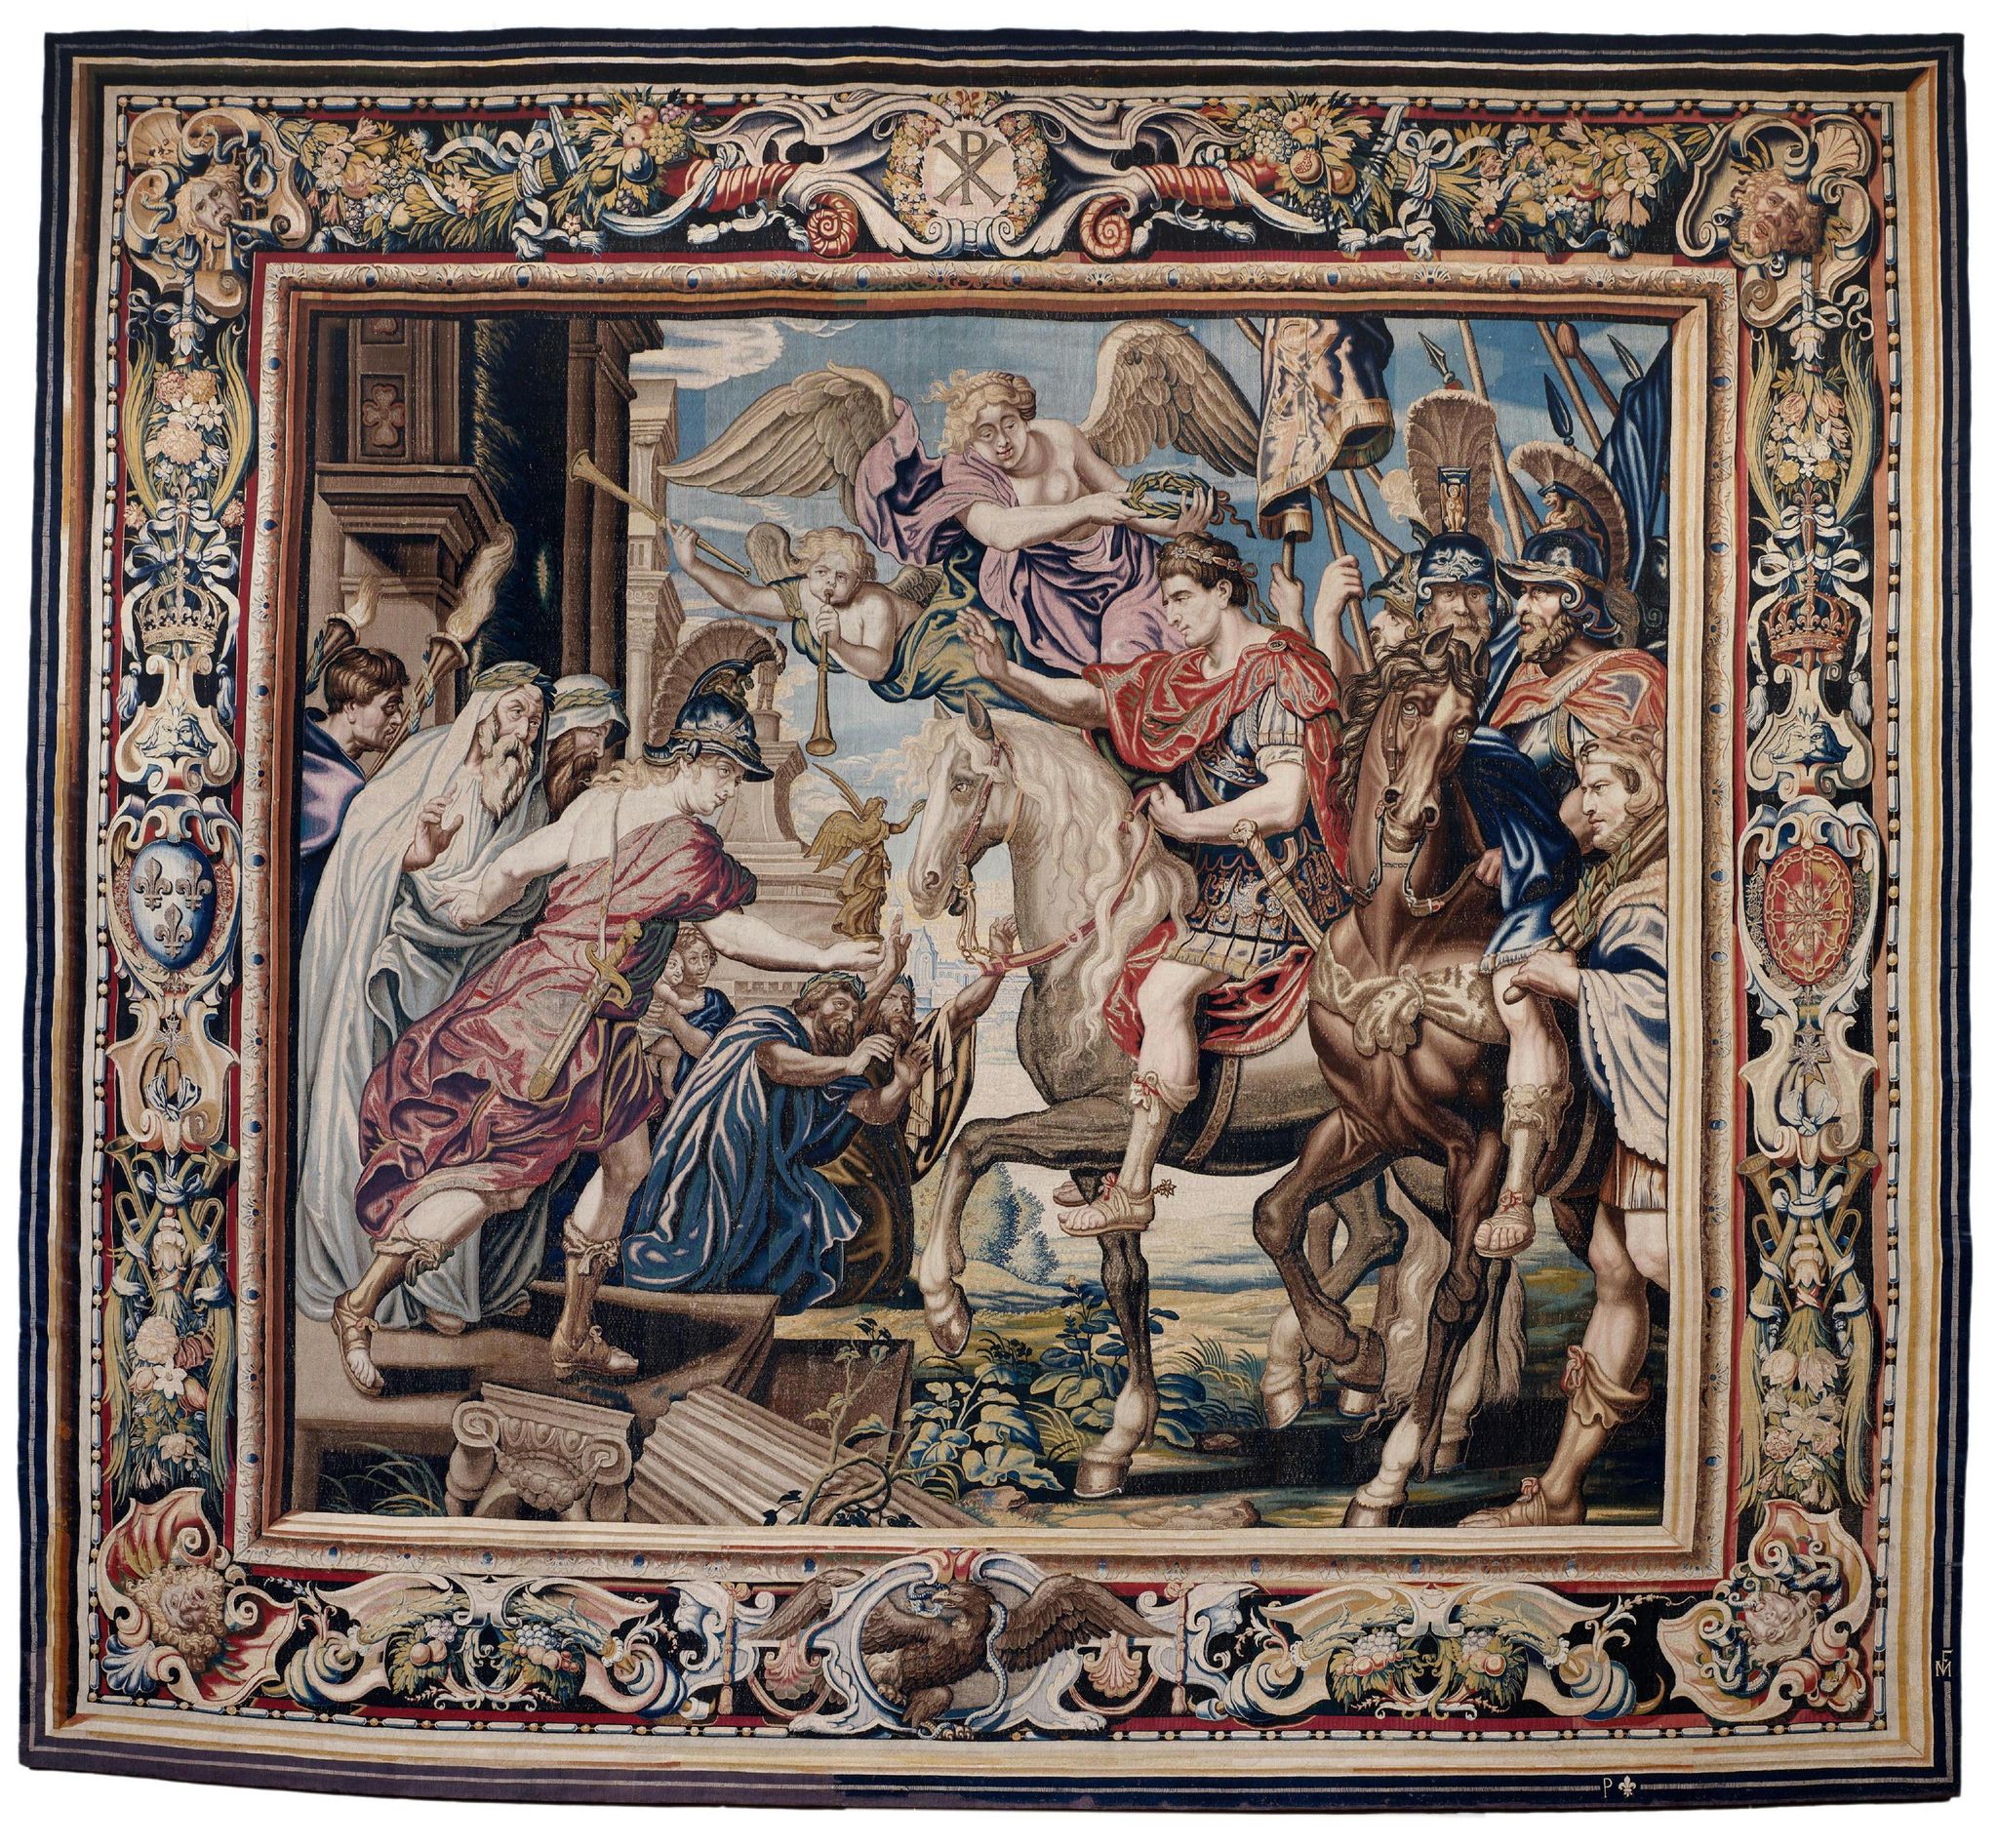 Tapestry showing Constantine's Triumphal Entry into Rome